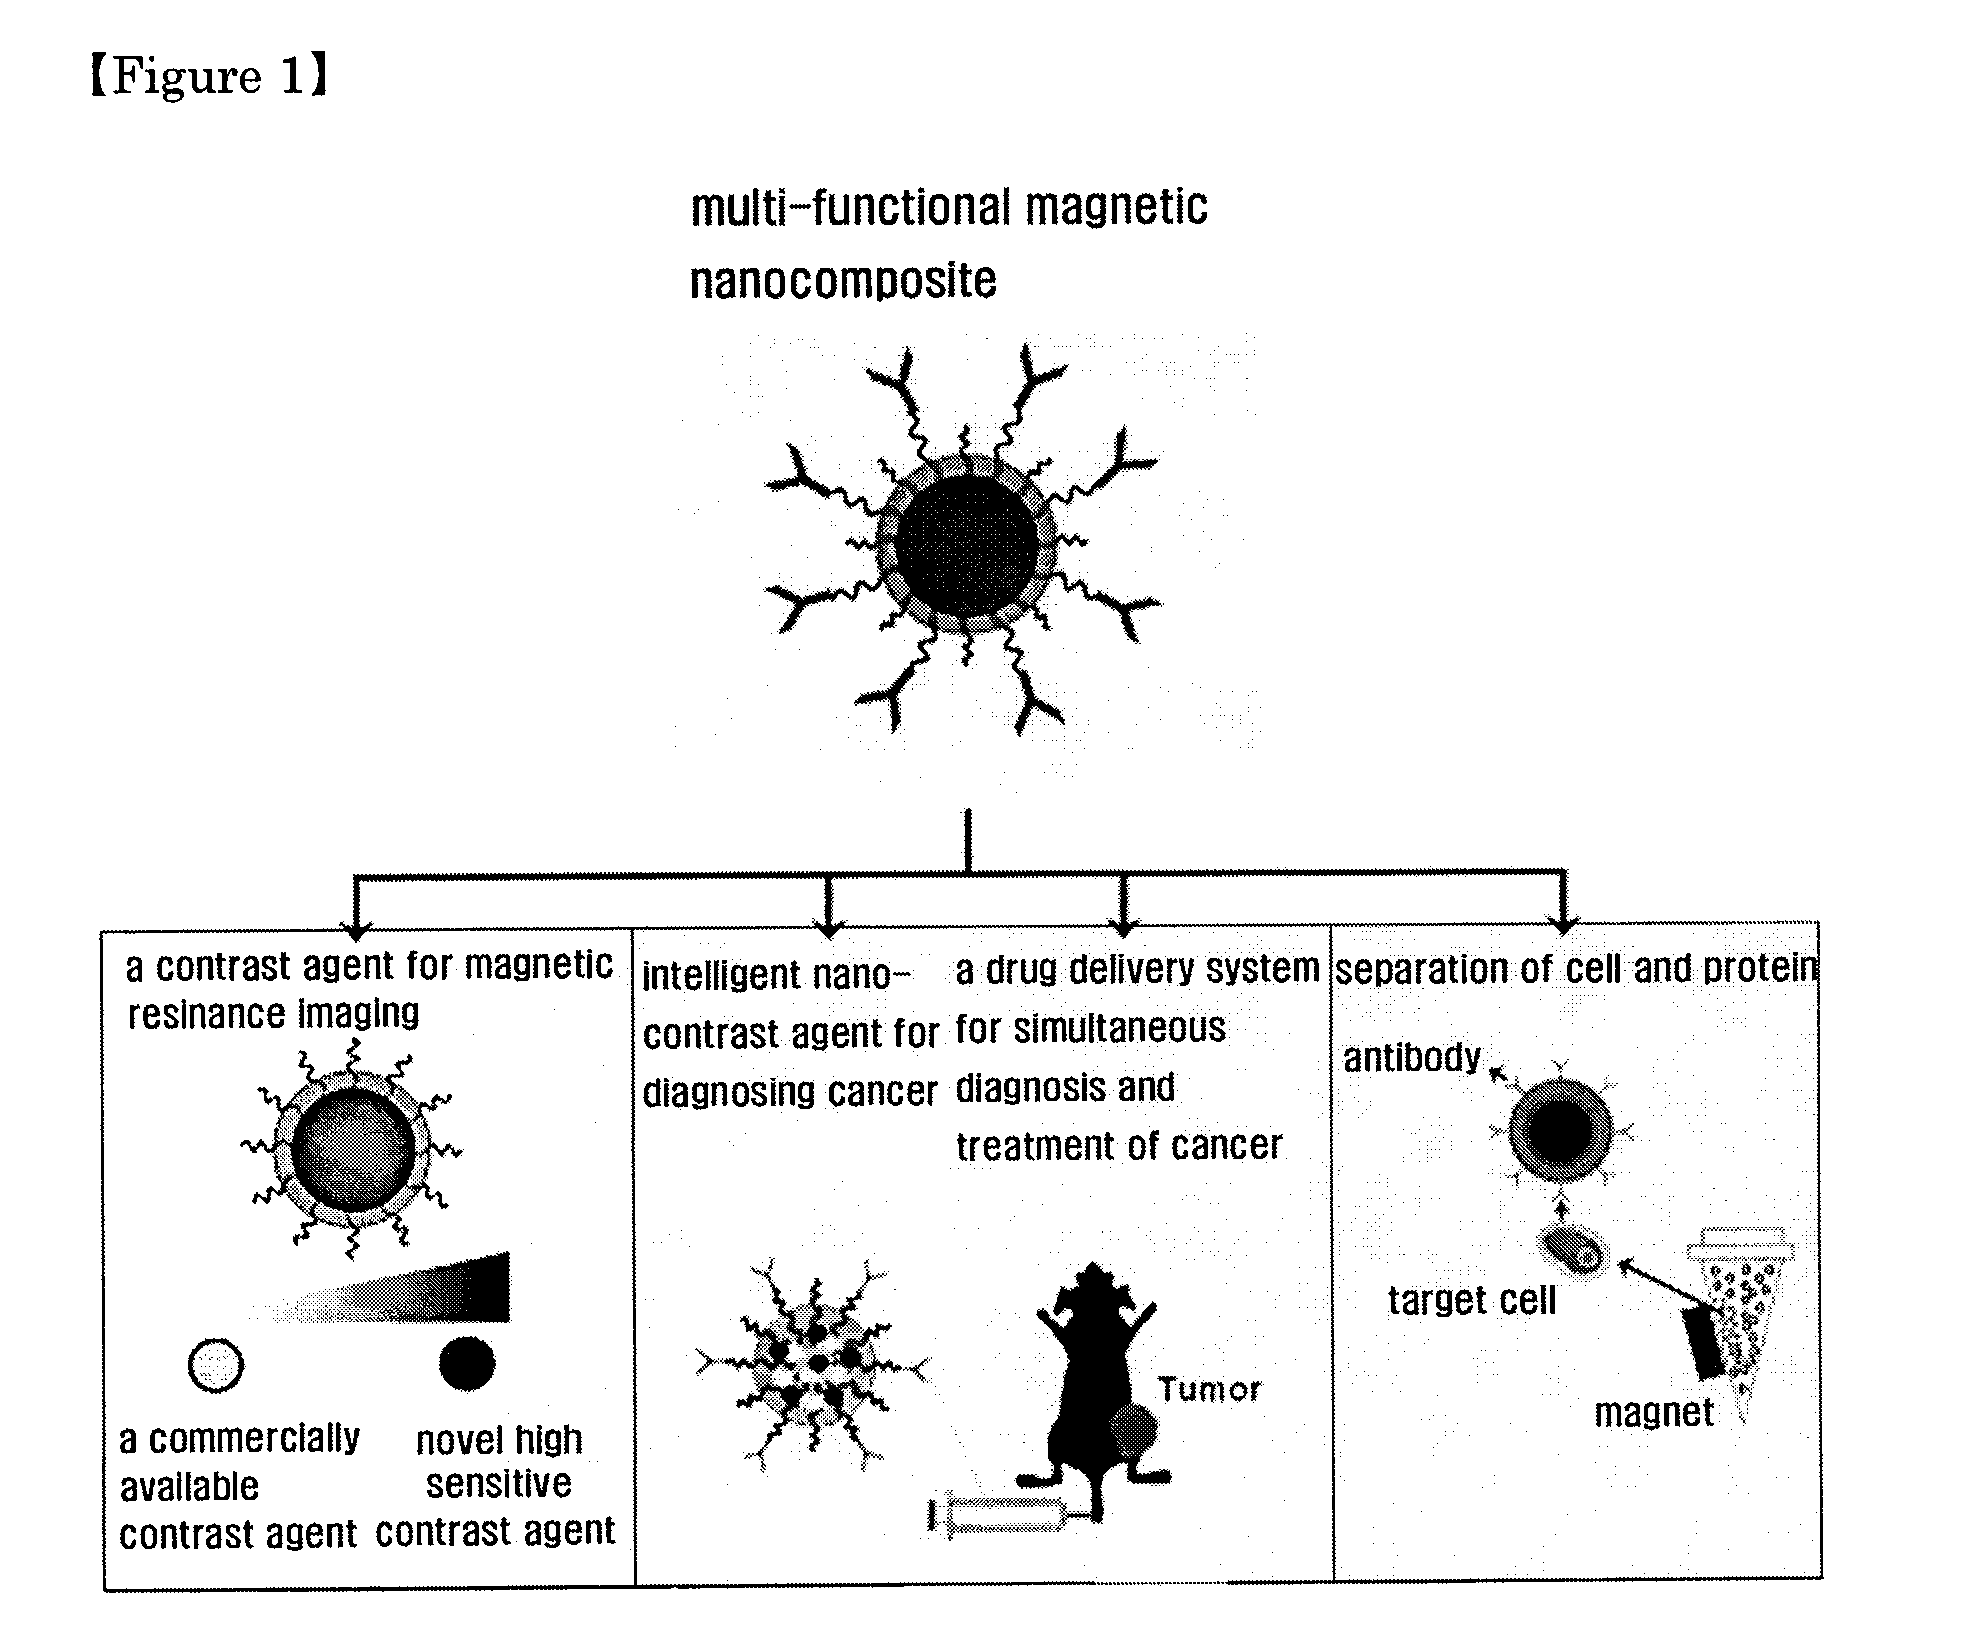 Magnetic nano-composite for contrast agent, intelligent contrast agent, drug delivery agent for simultaneous diagnosis and treatment, and separation agent for target substance